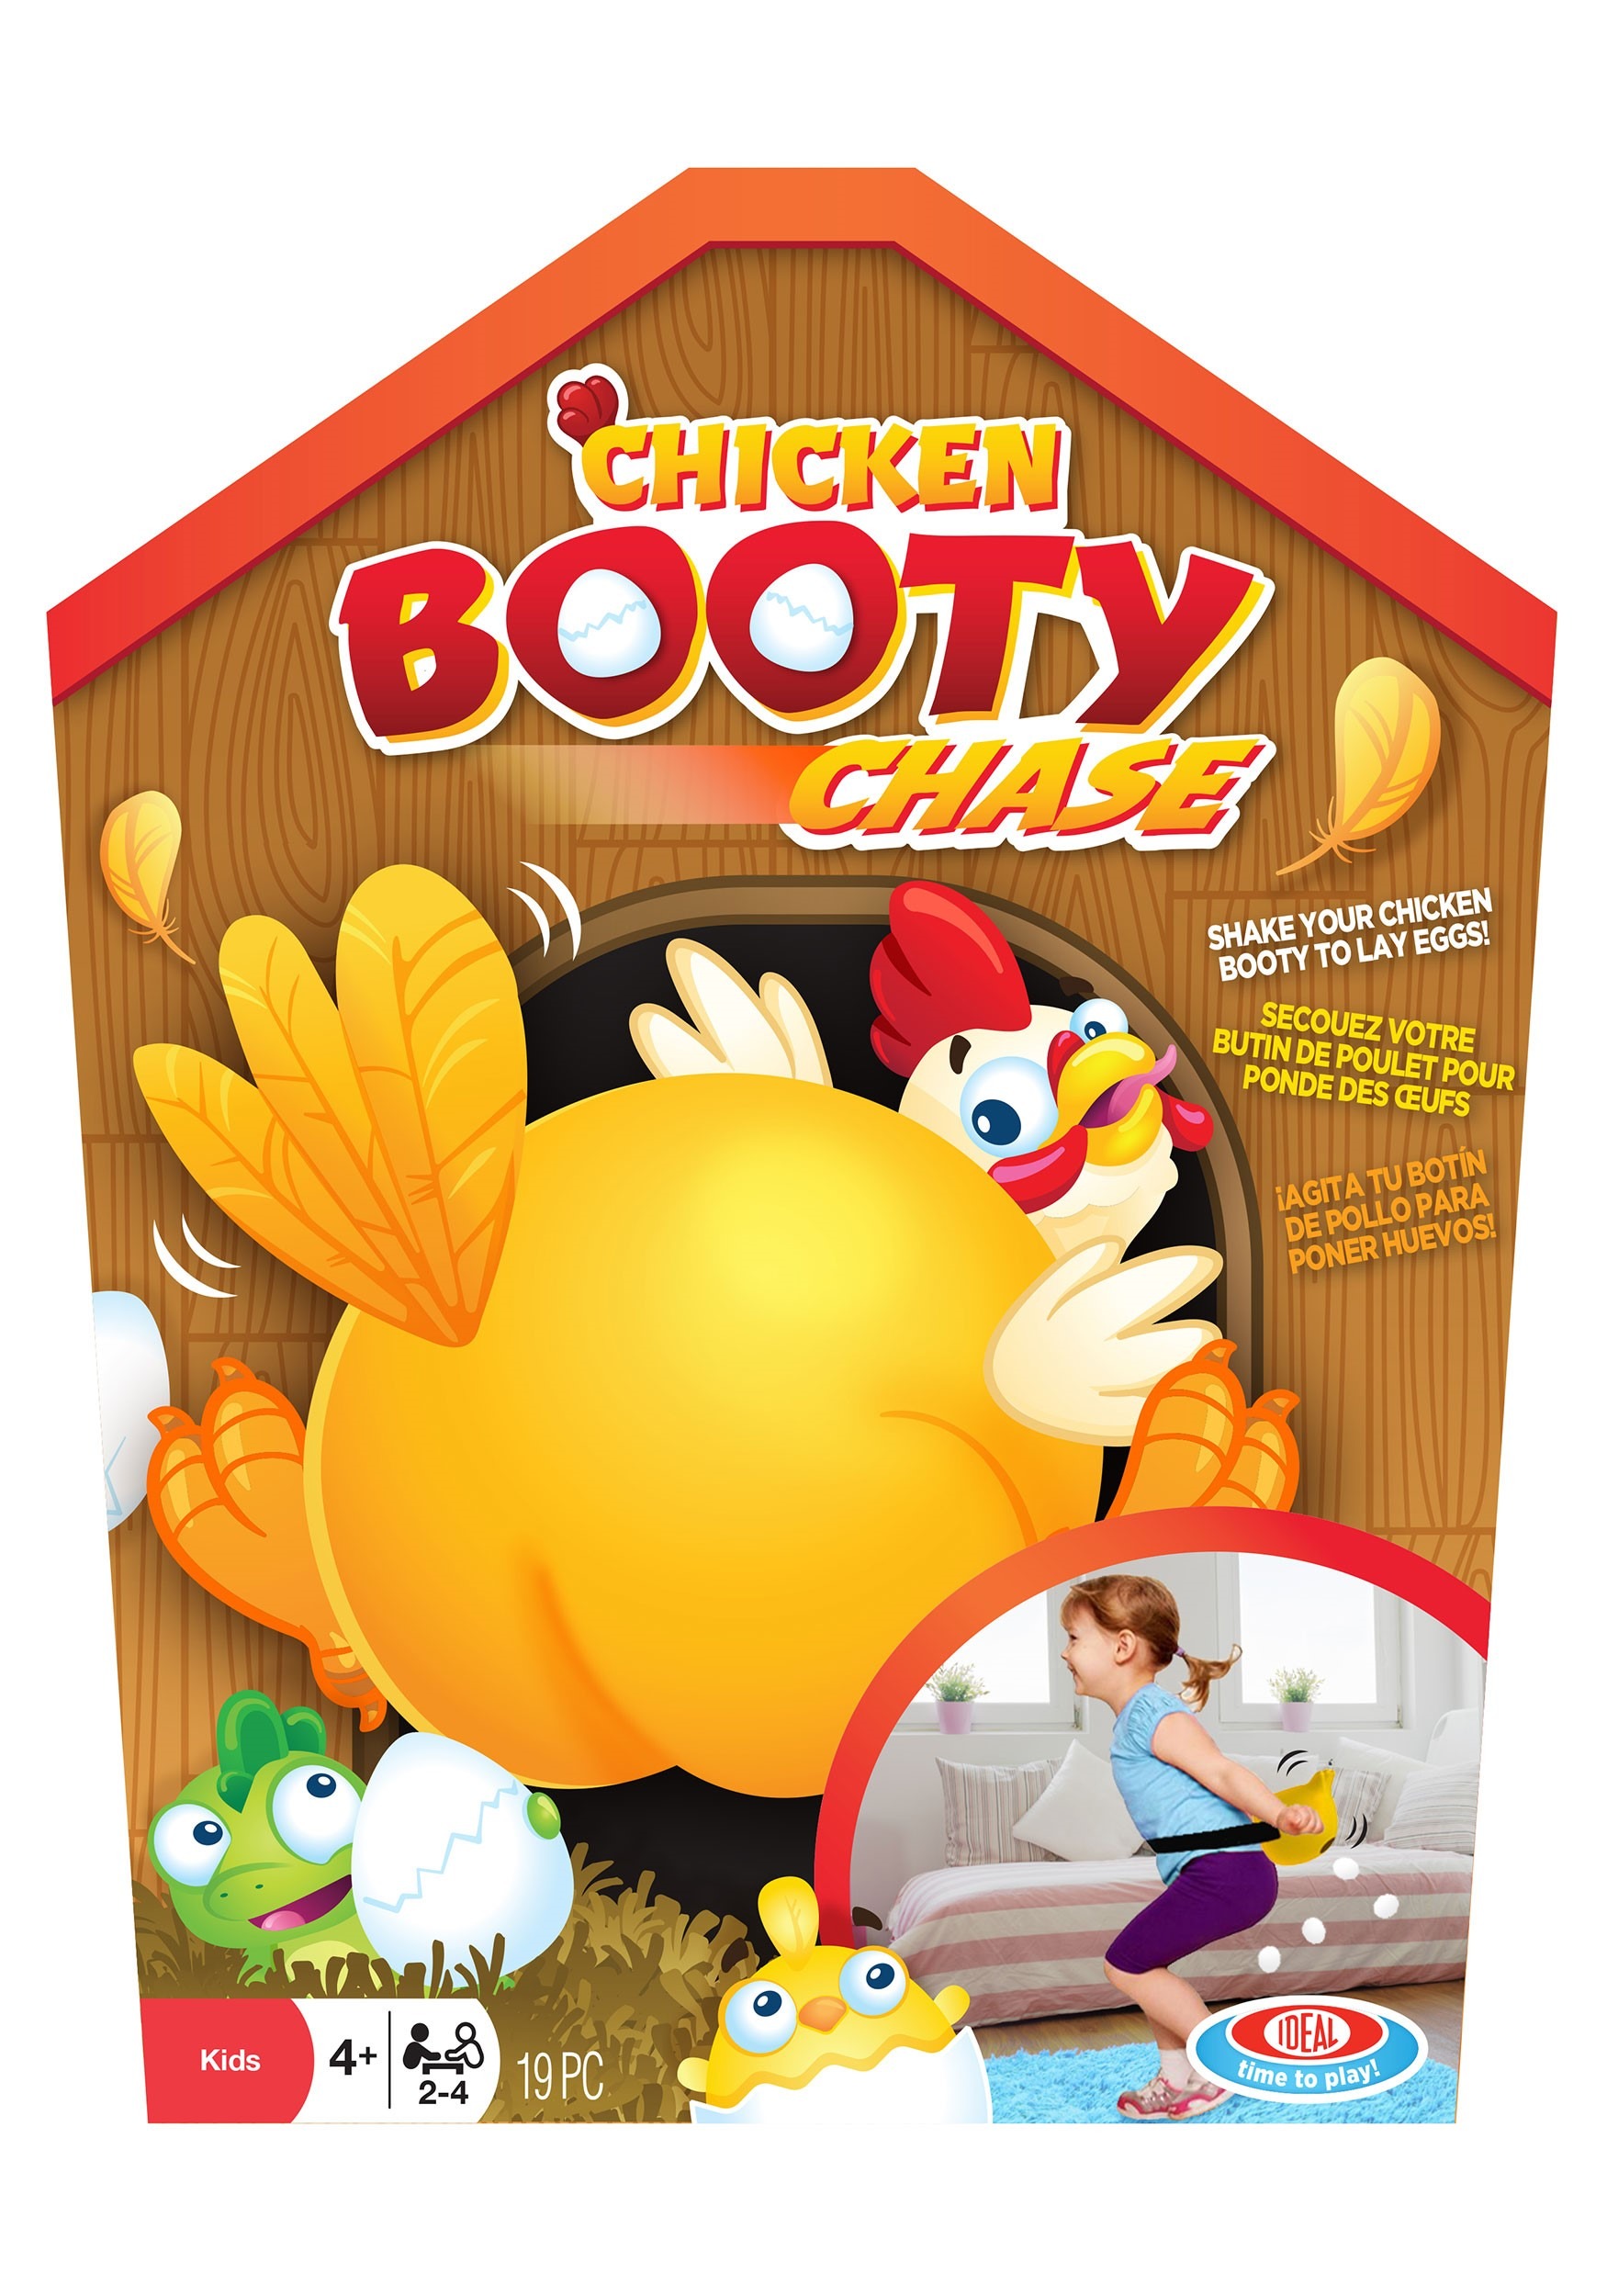 Booty Chase Chicken Game for Kids